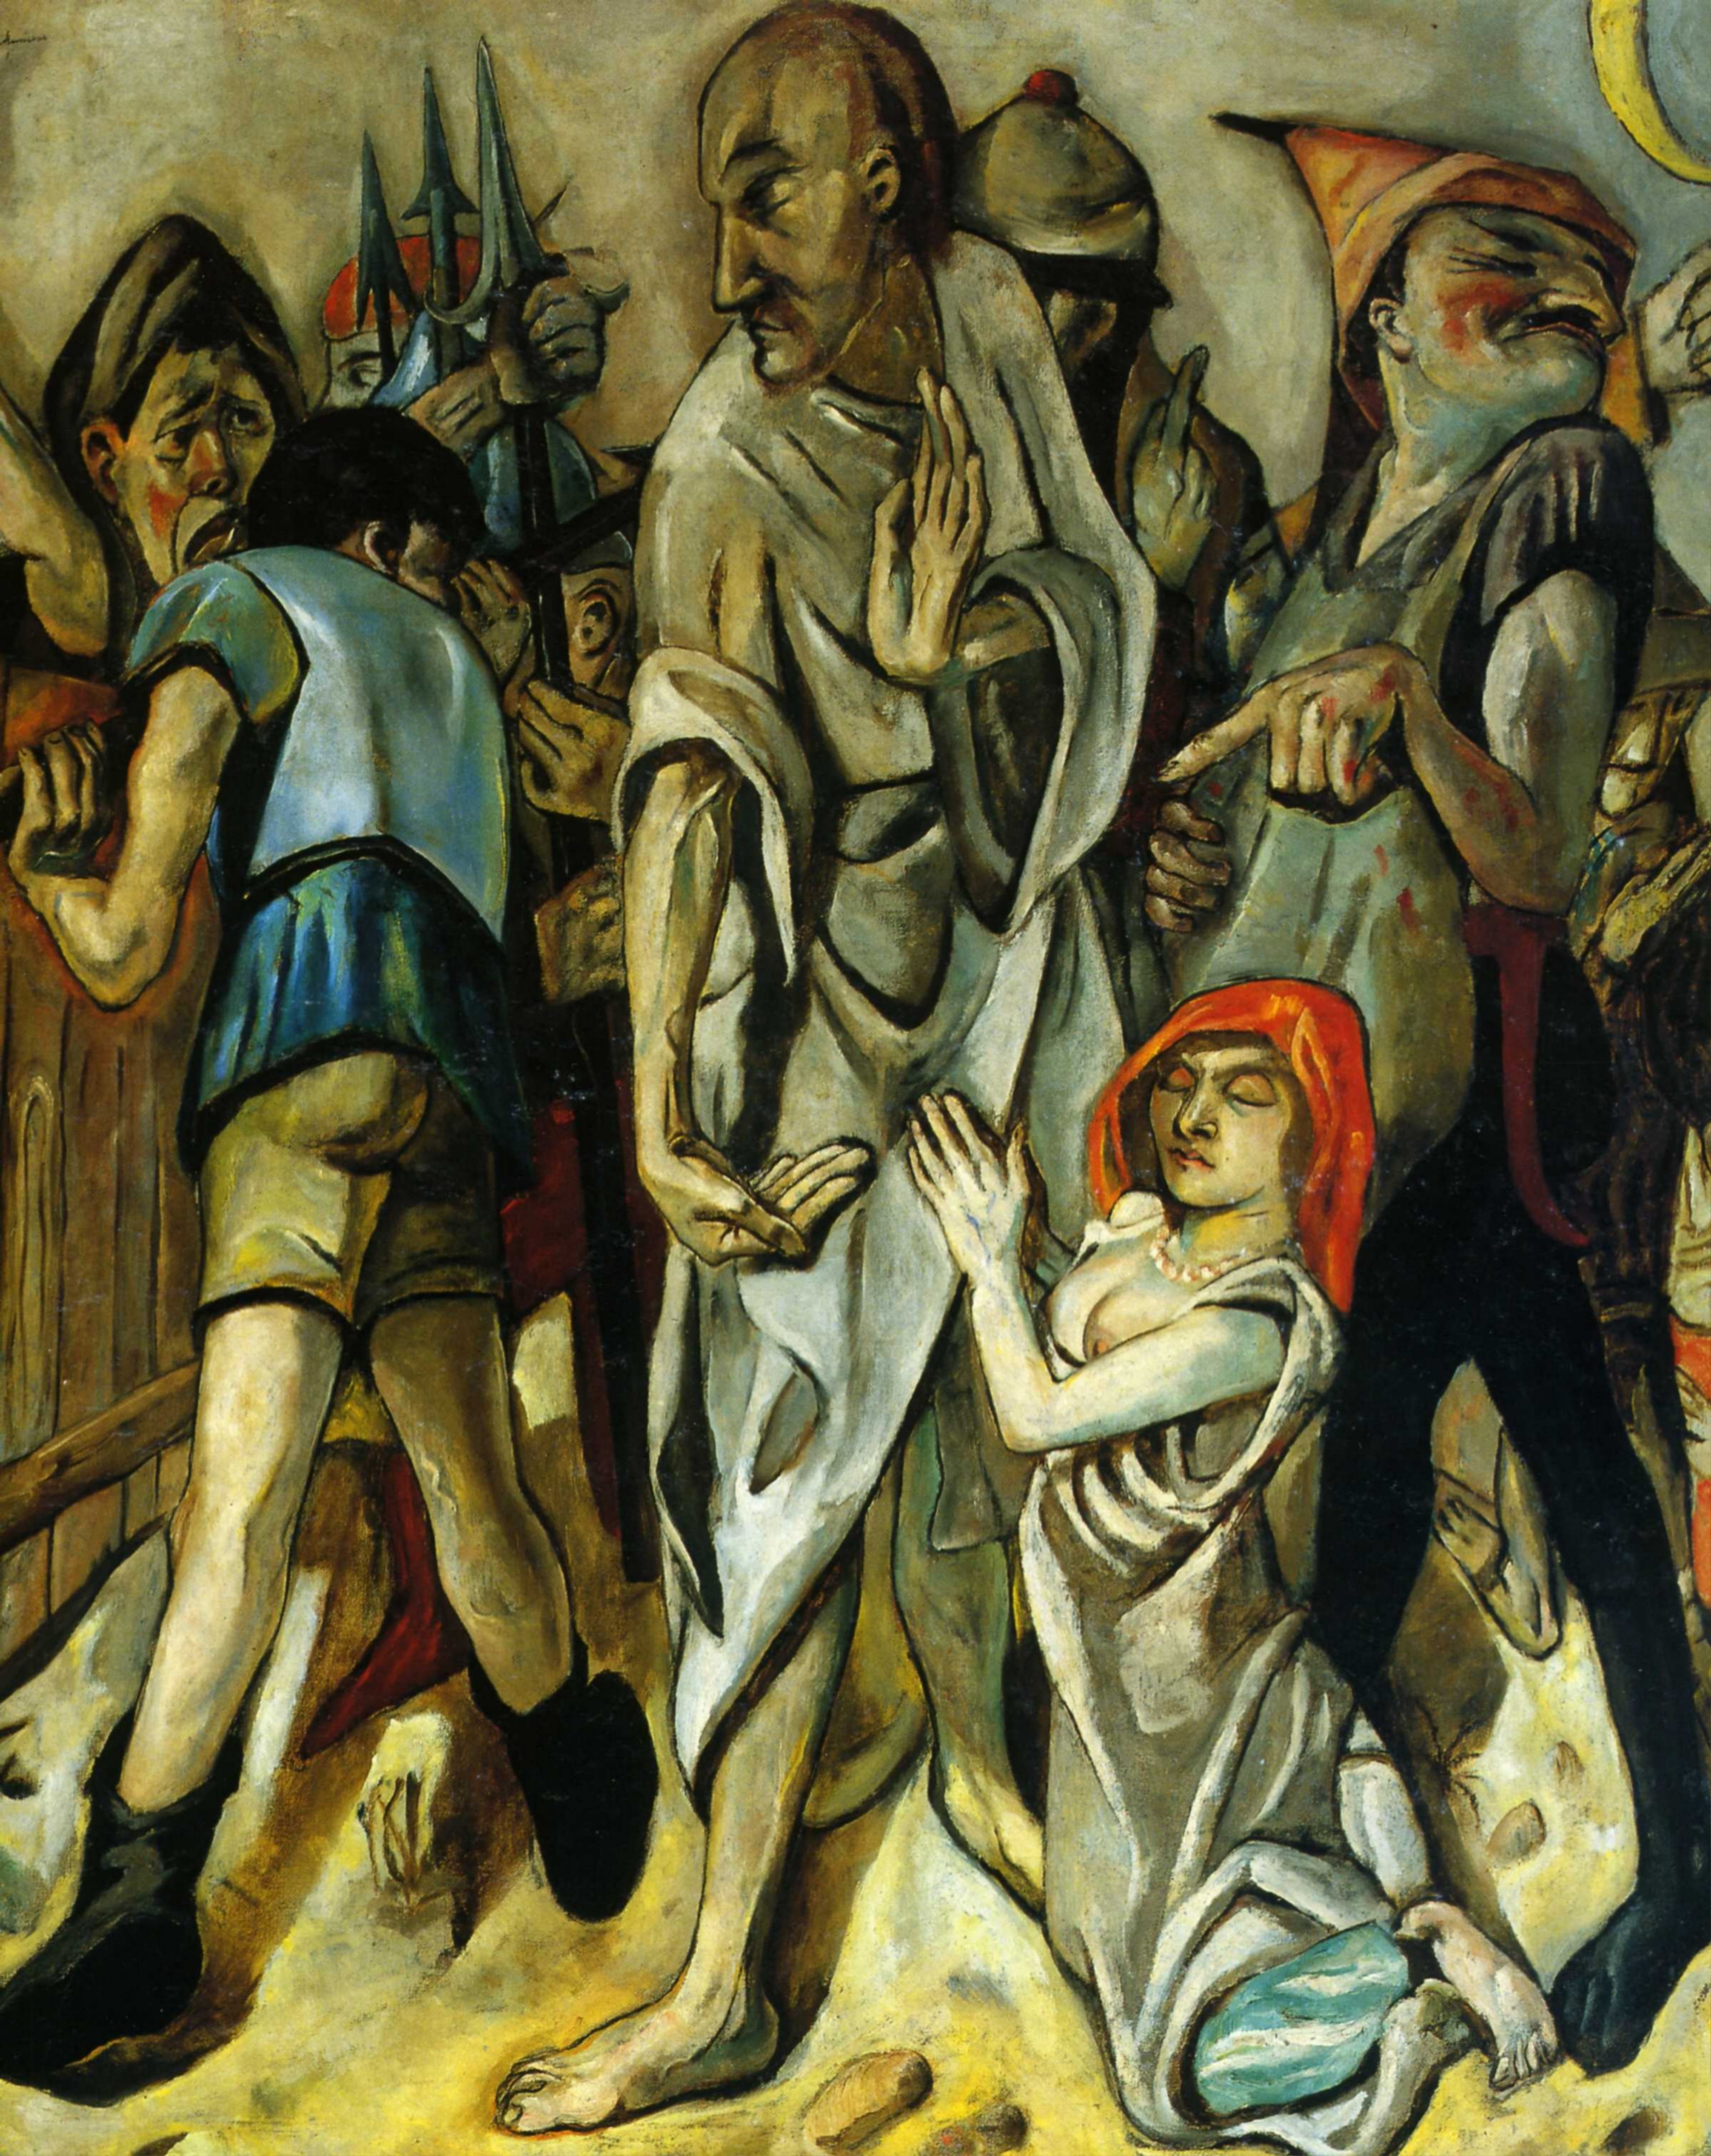 1917 Max Beckmann - Christ&the adulterous woman